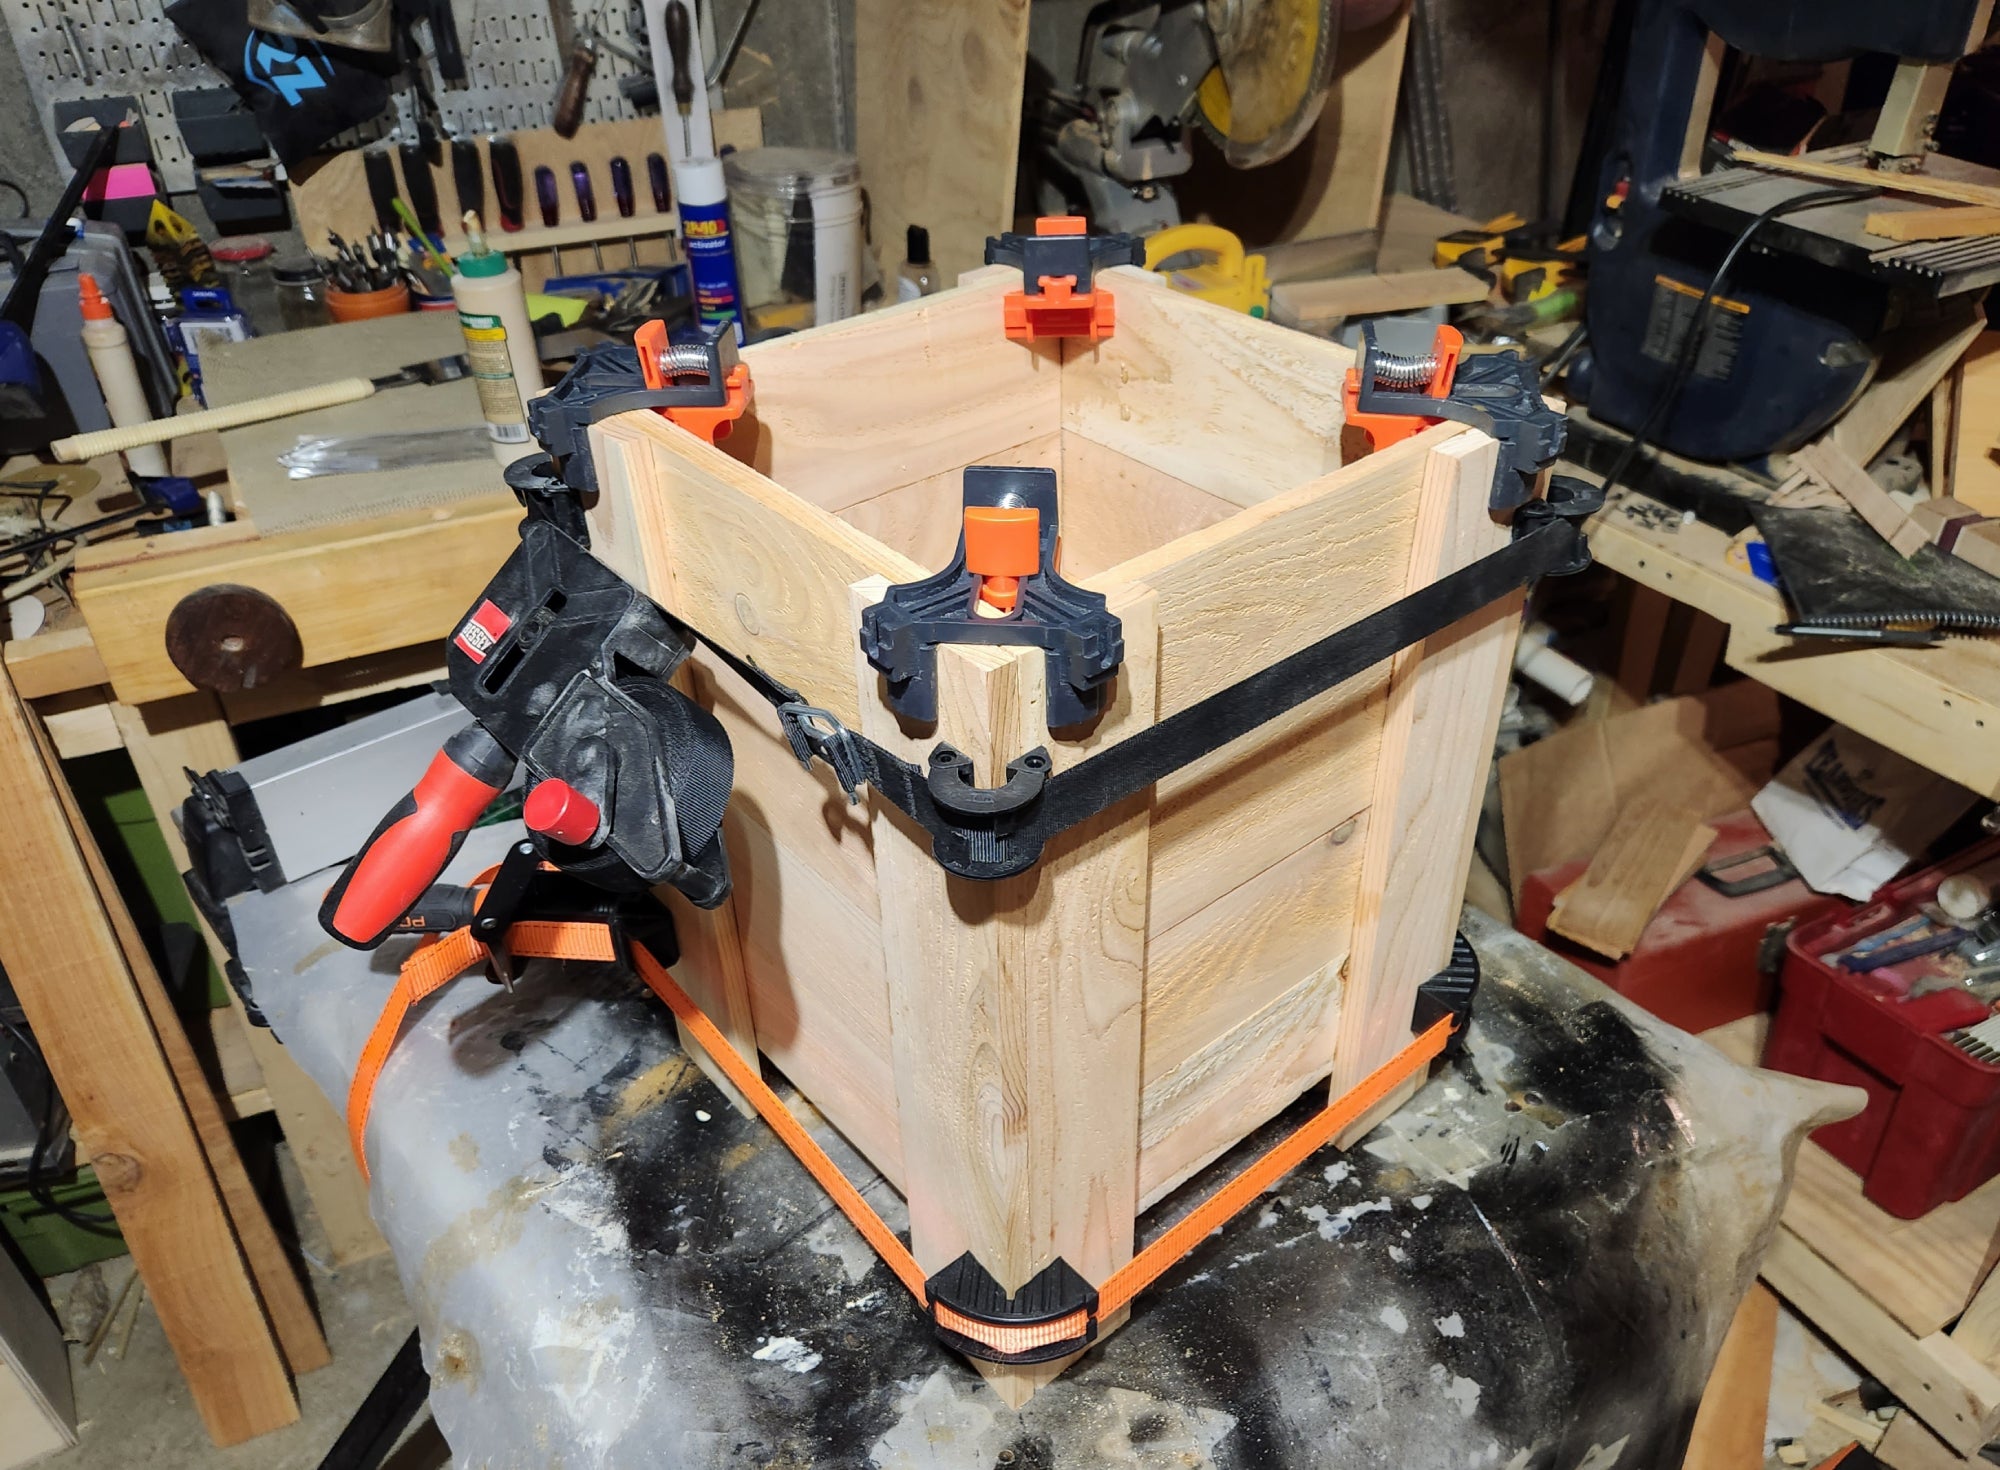 A DIY cedar planter box assembled, glued, clamped and placed on a table in the middle of a wood workshop.